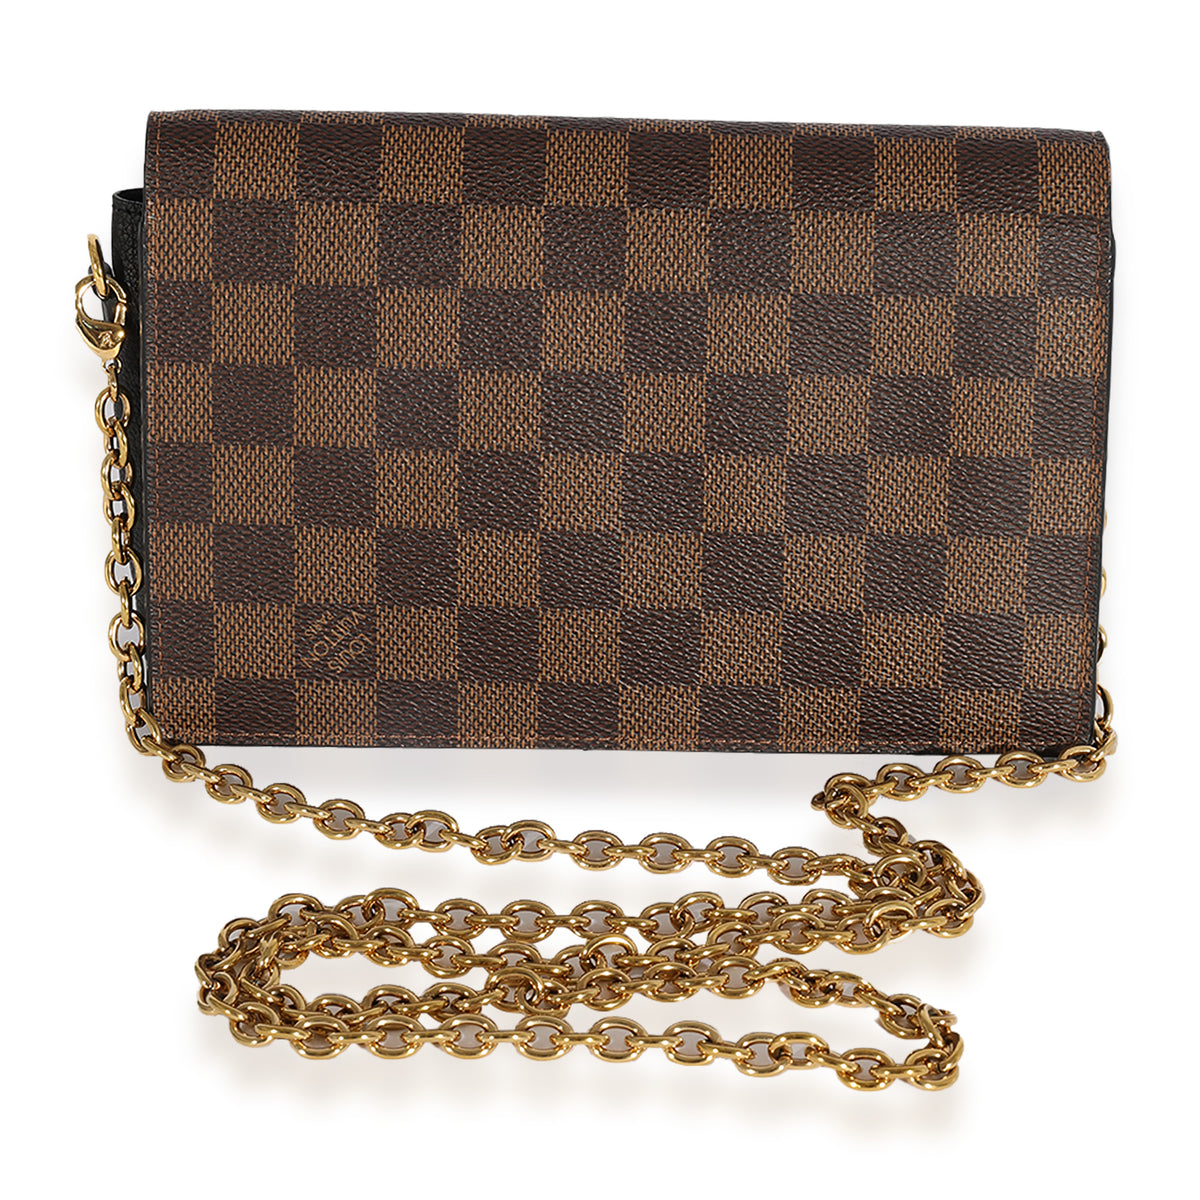 Vavin Chain Wallet Damier Ebene Canvas - Wallets and Small Leather